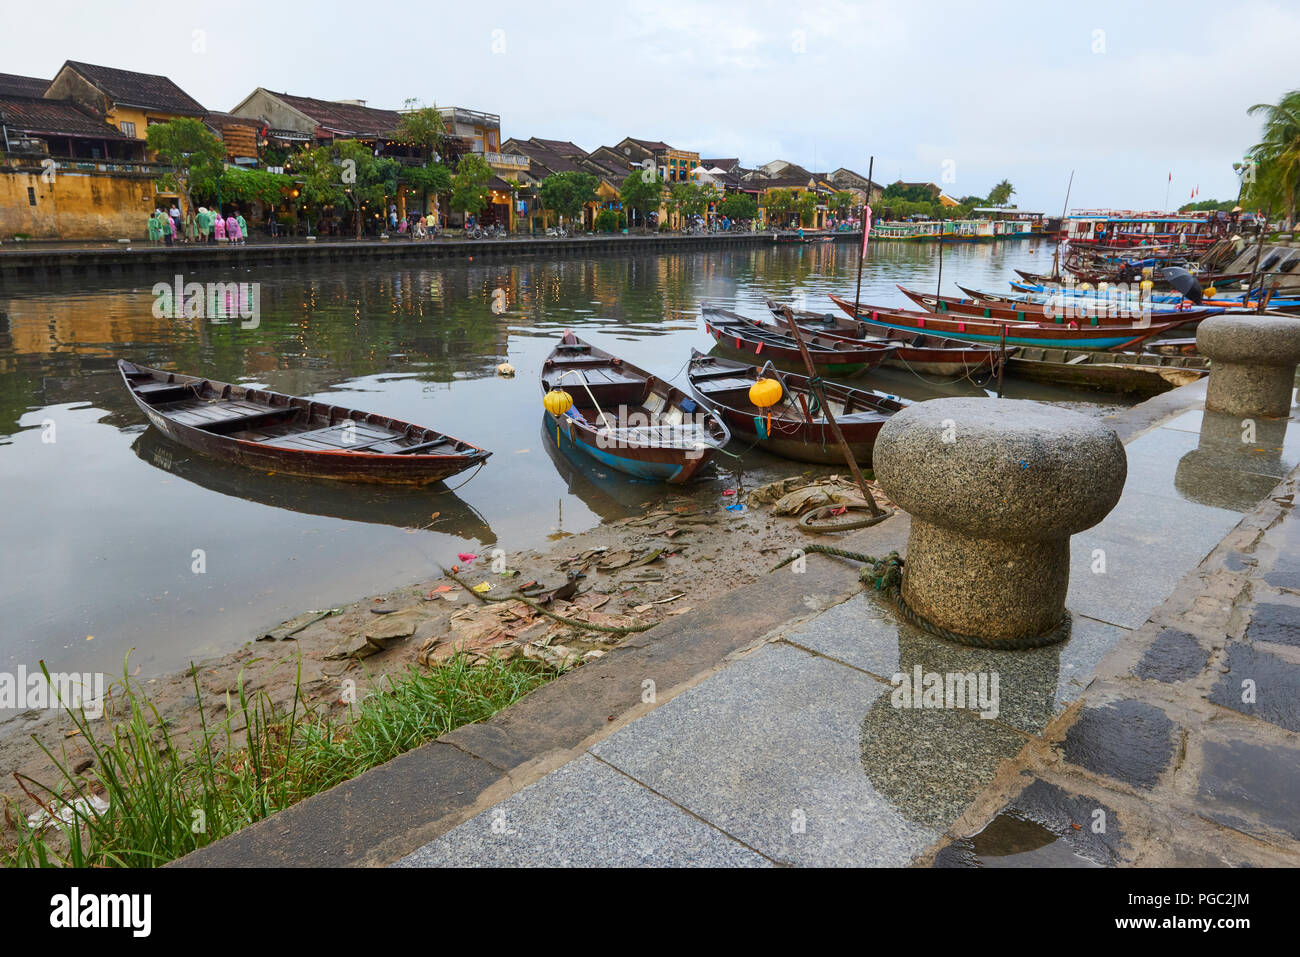 Rowing boats docked in the main canal in the UNESCO World Heritage Site town of Hoi An, in Central Vietnam. Stock Photo